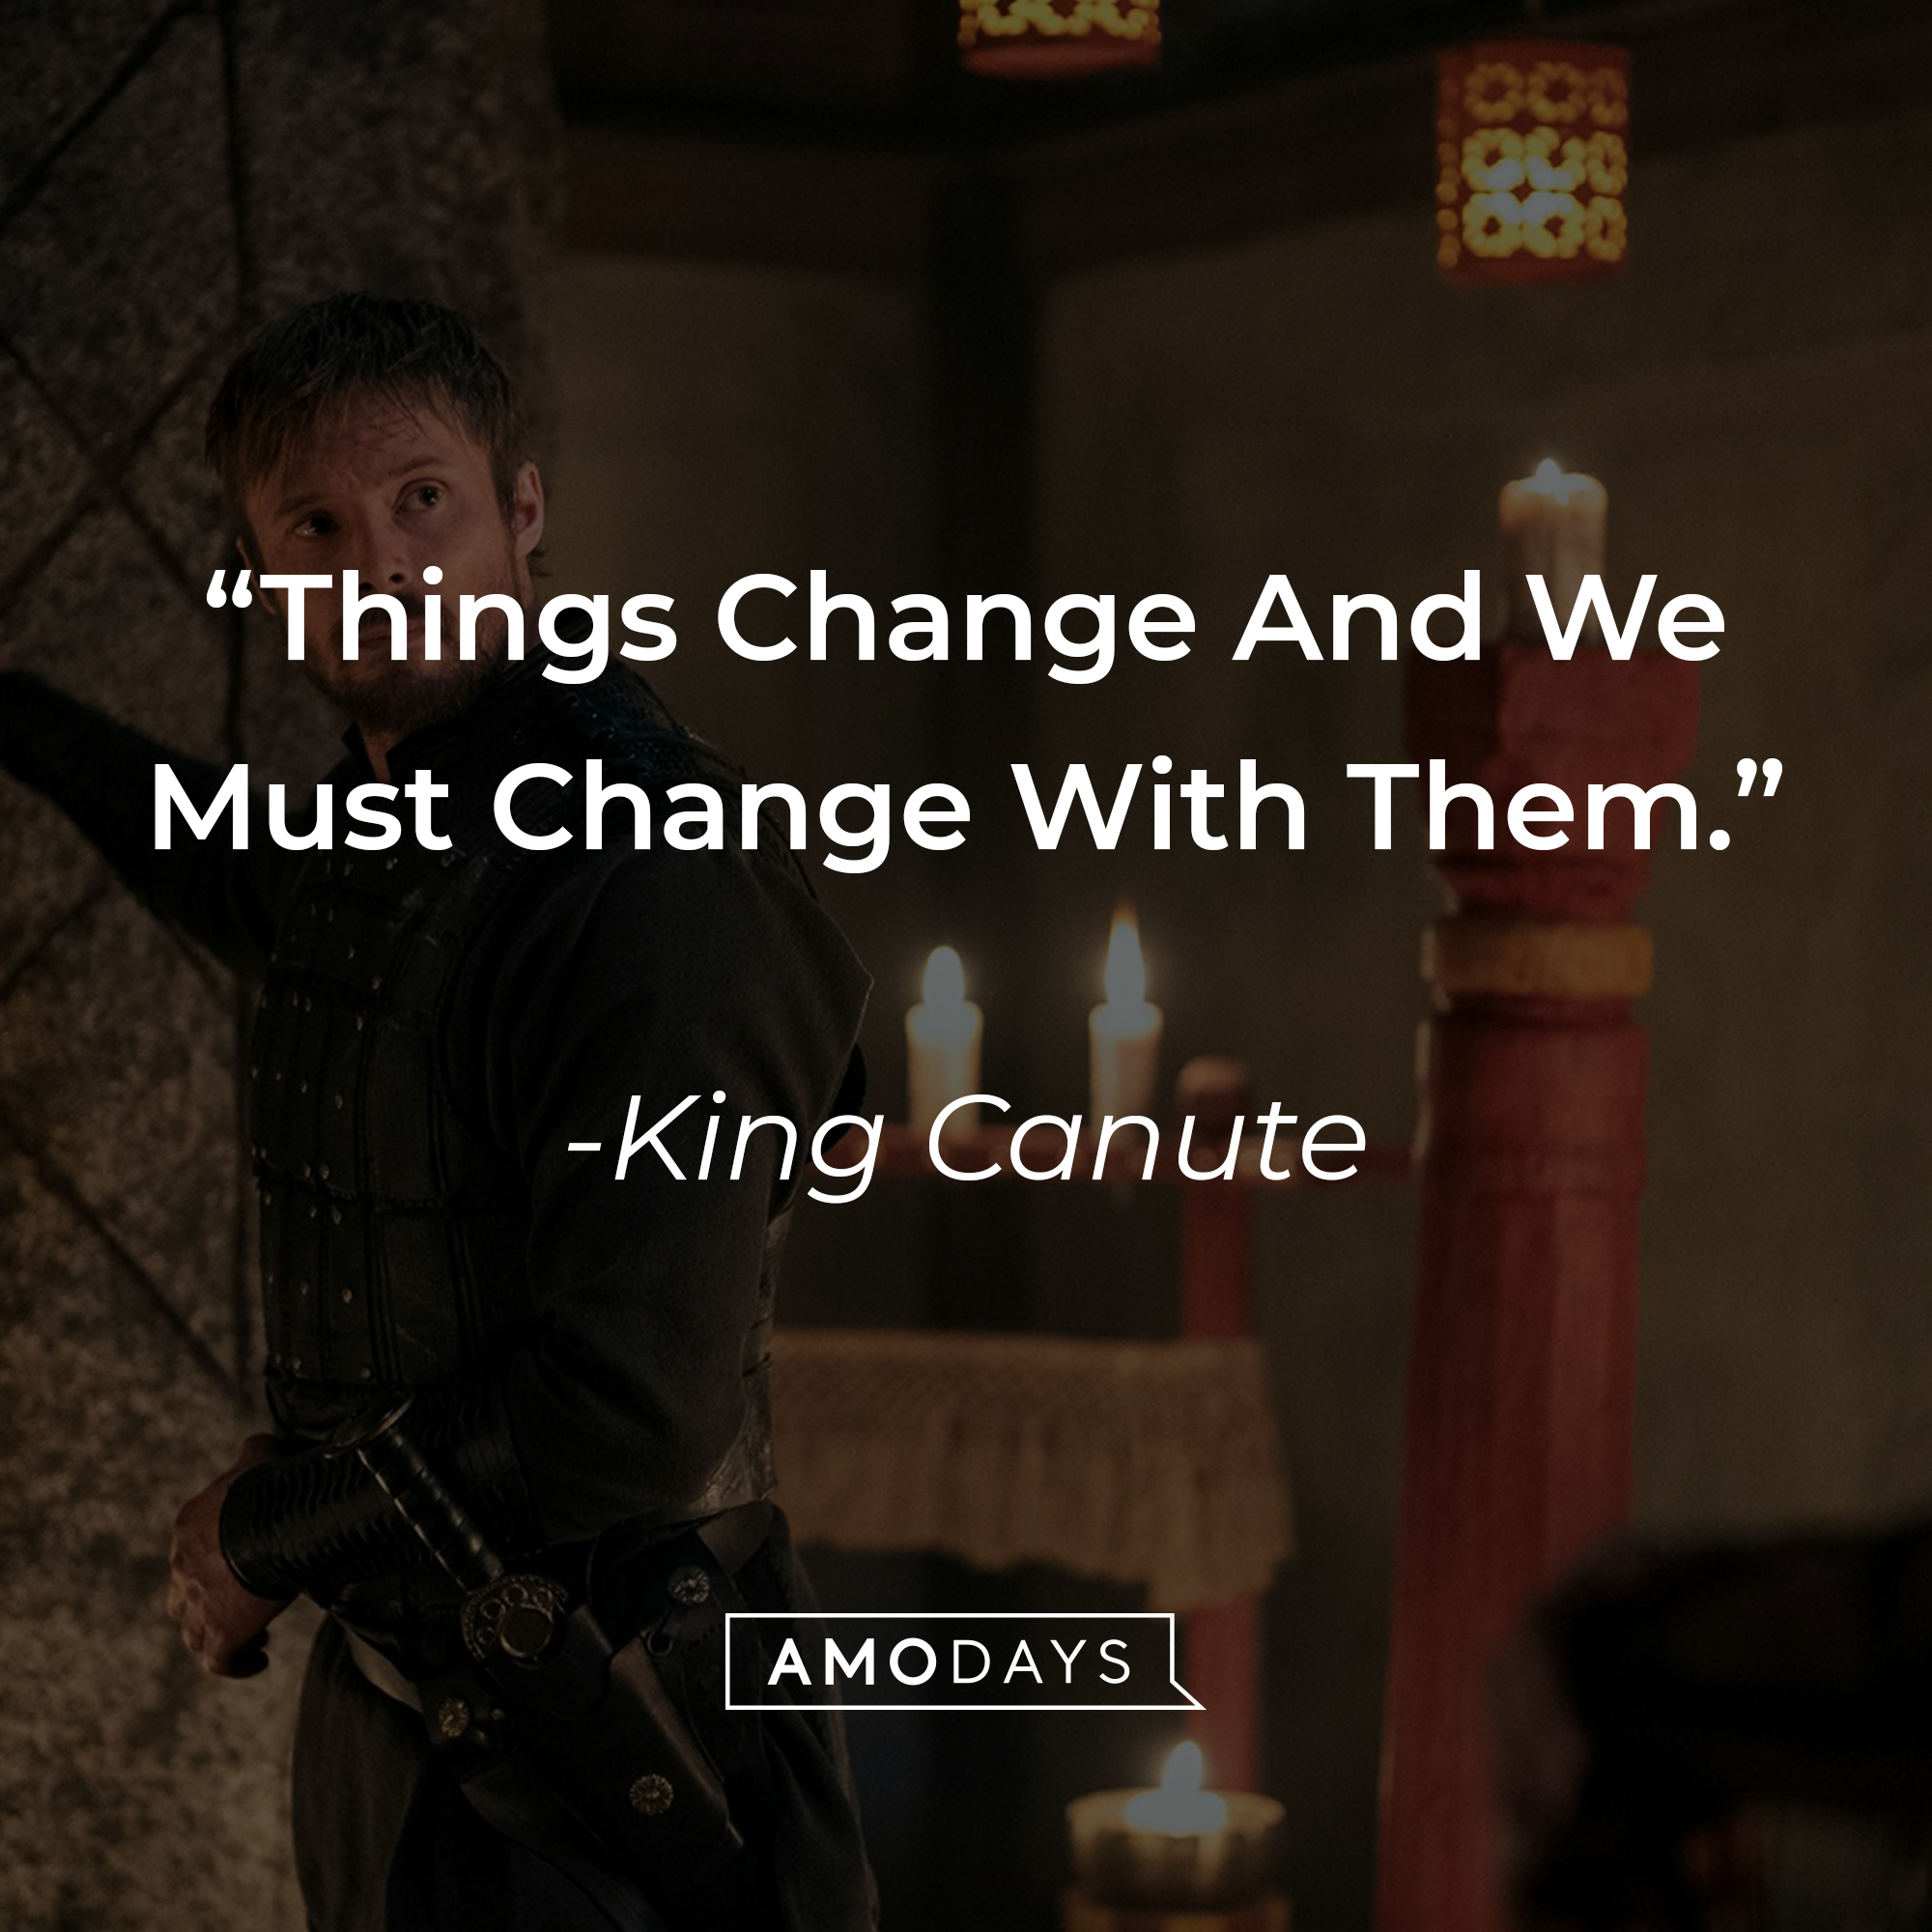 King Canute's quote: "Things Change And We Must Change With Them."┃Source: facebook.com/netflixvalhalla